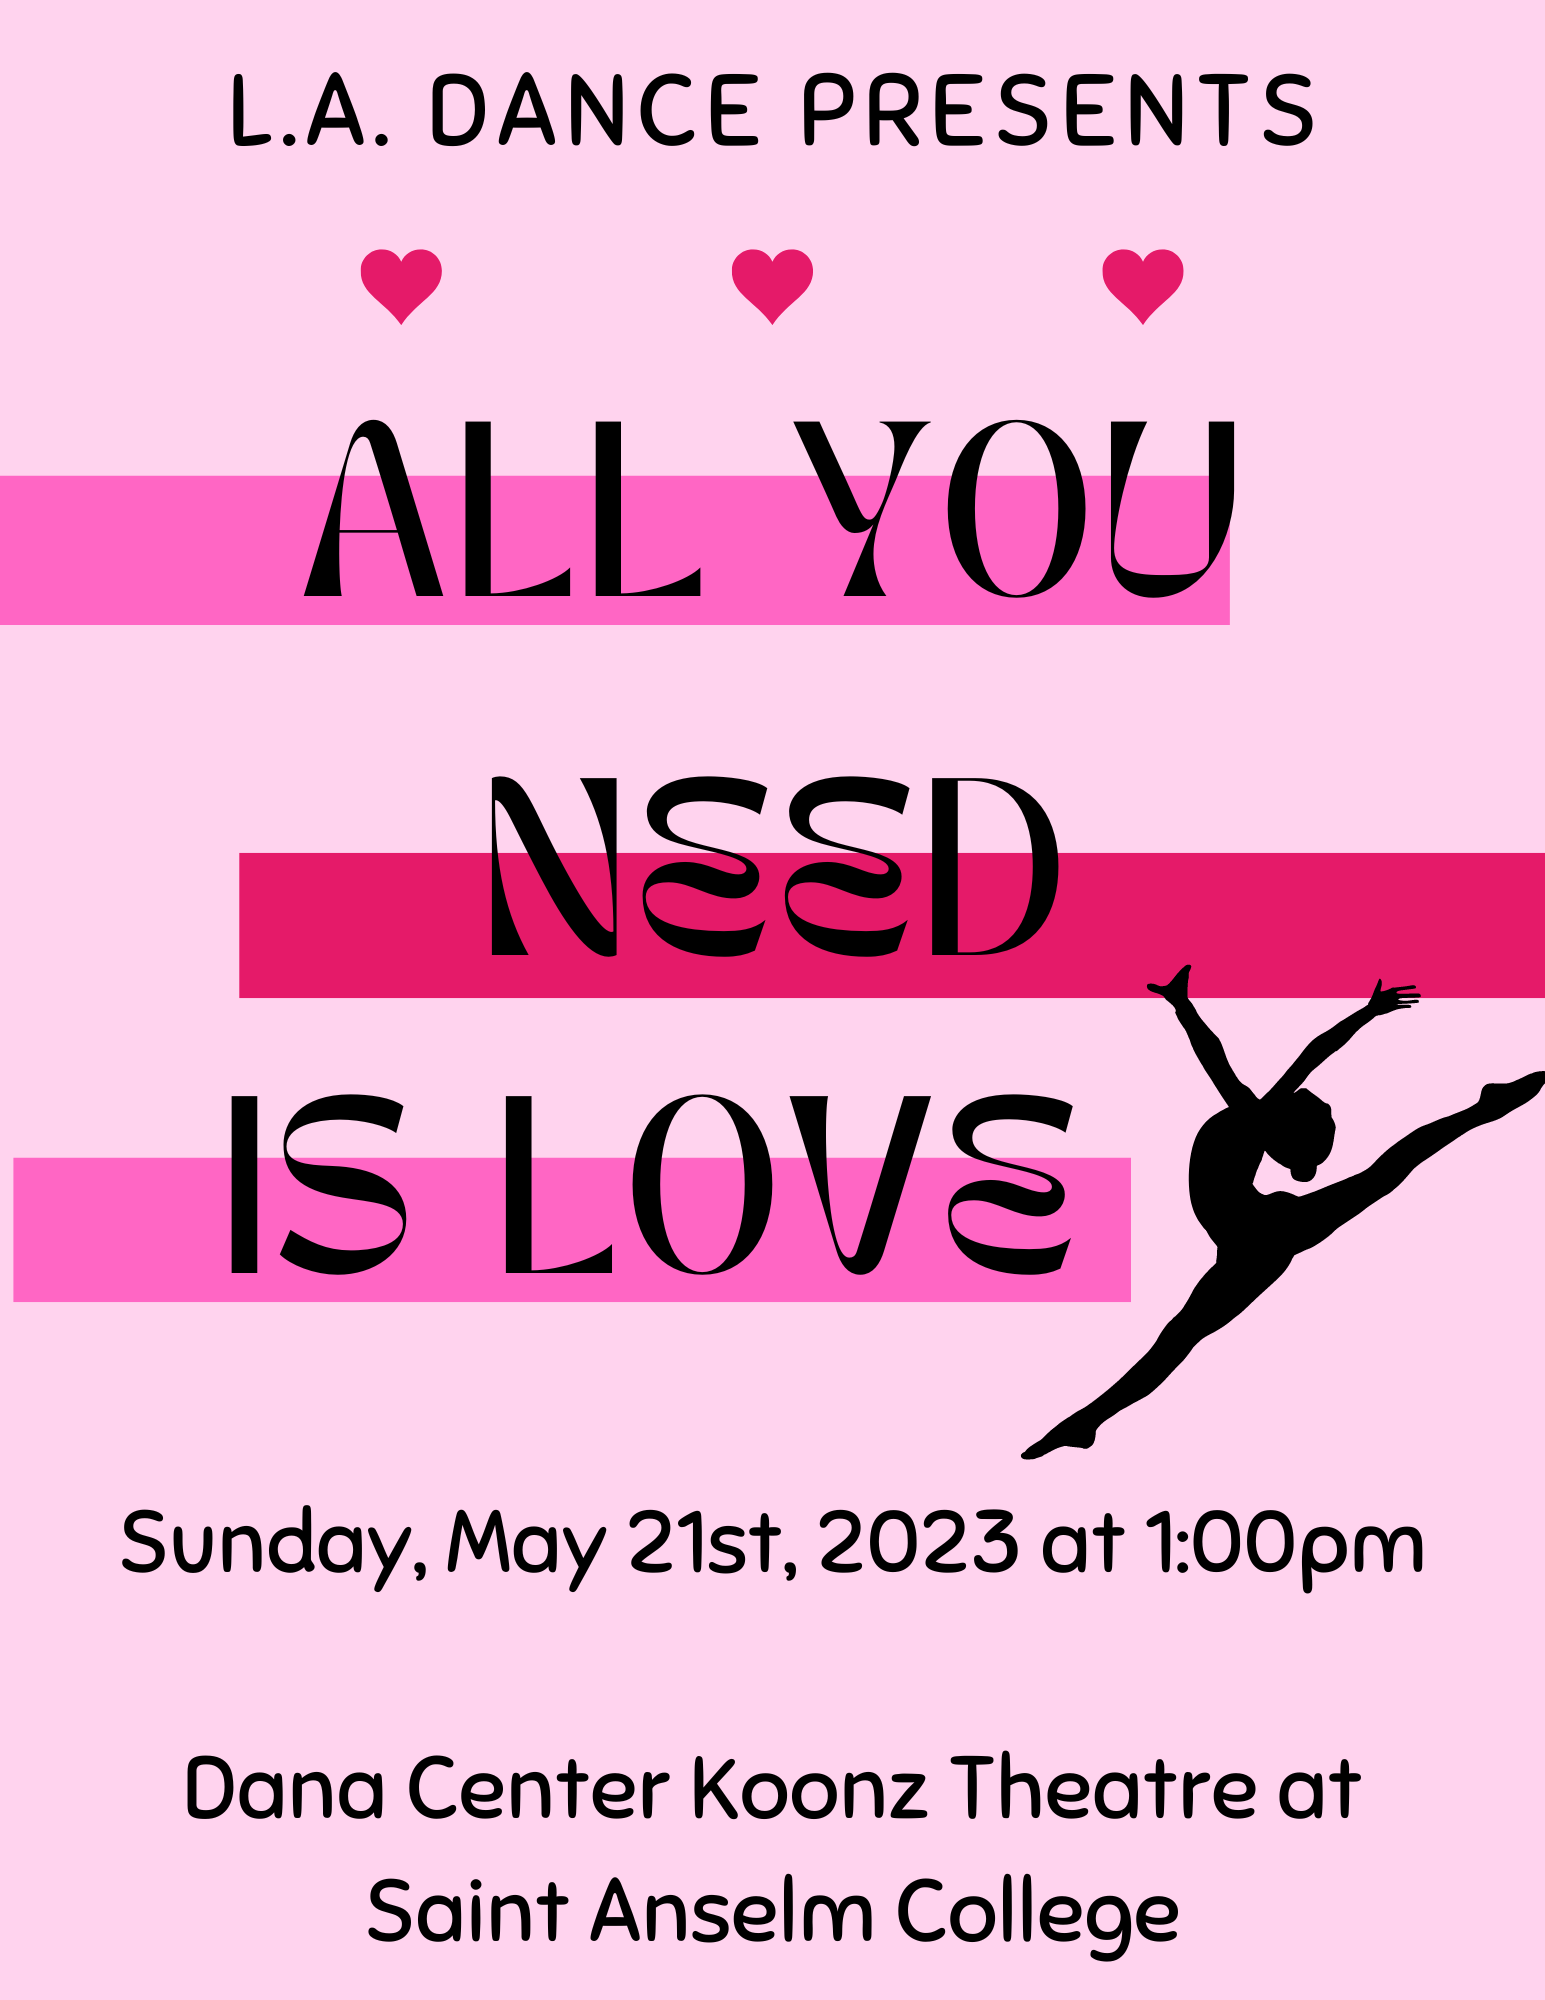 L.A. Dance Presents: All You Need Is Love